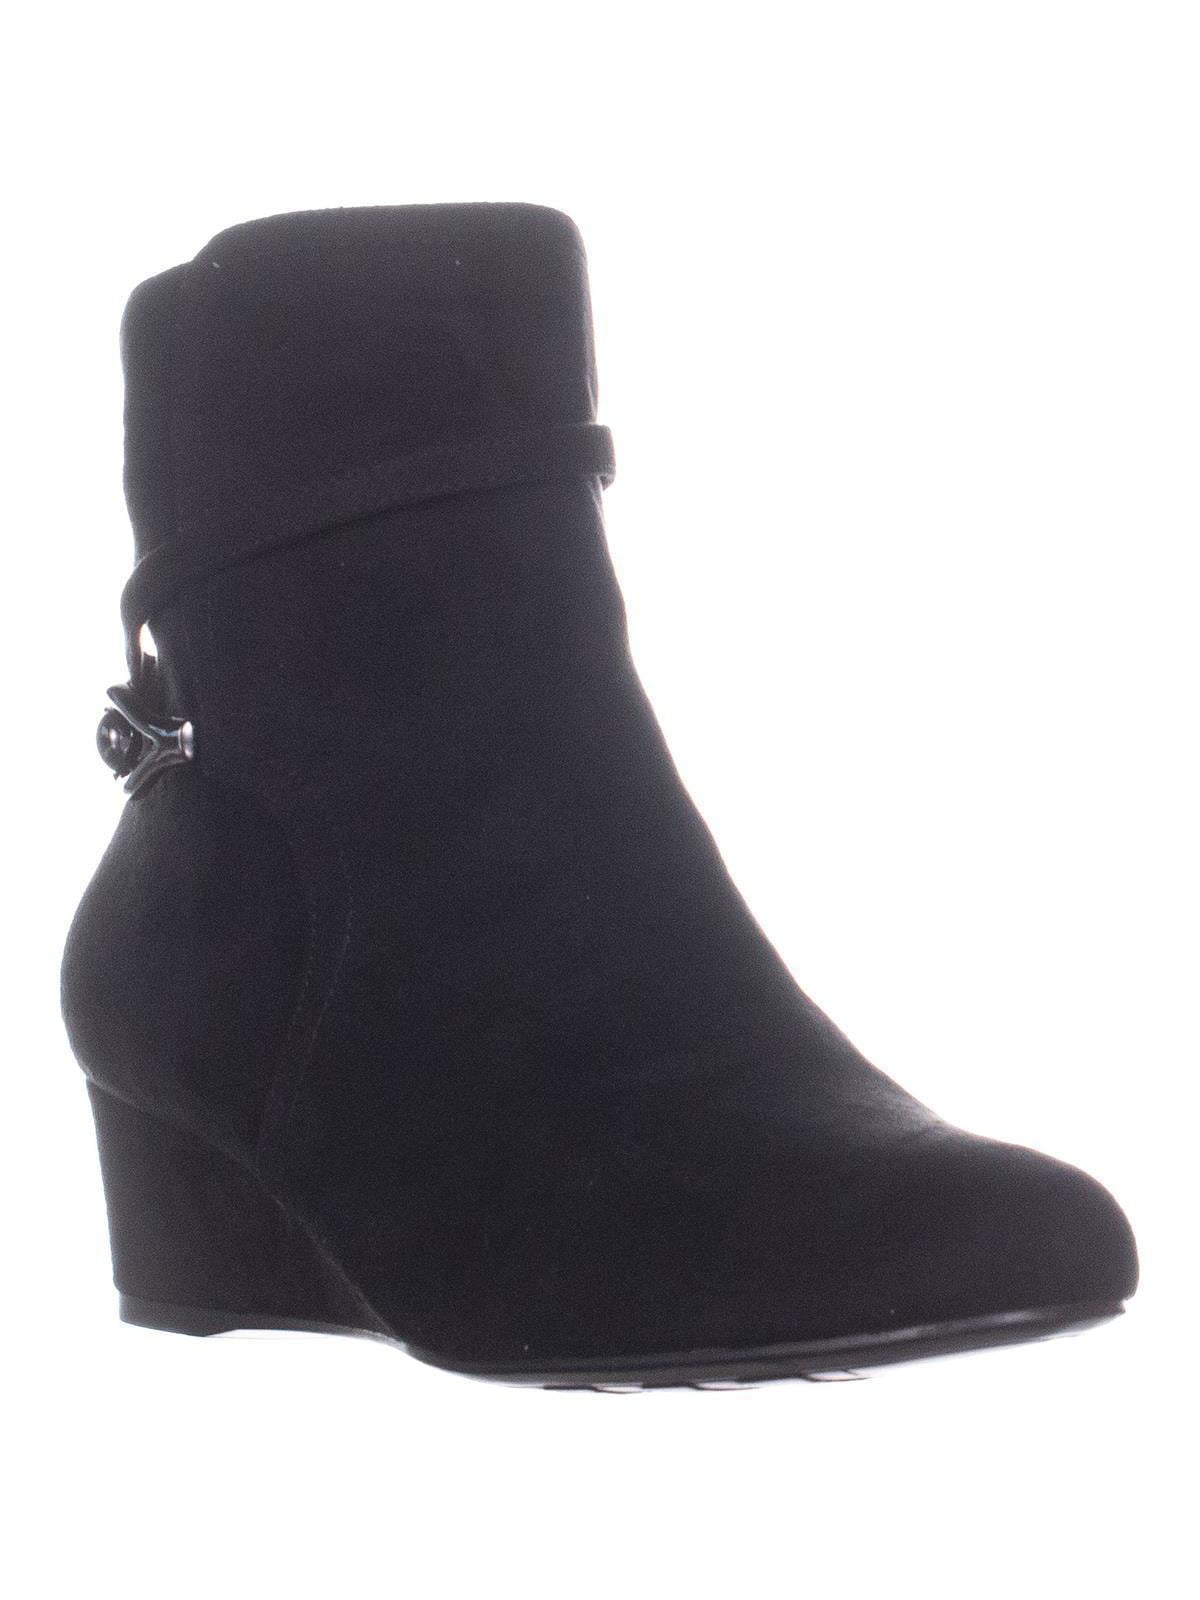 Womens Impo Glammed Wedge Ankle Boots, Black - Walmart.com